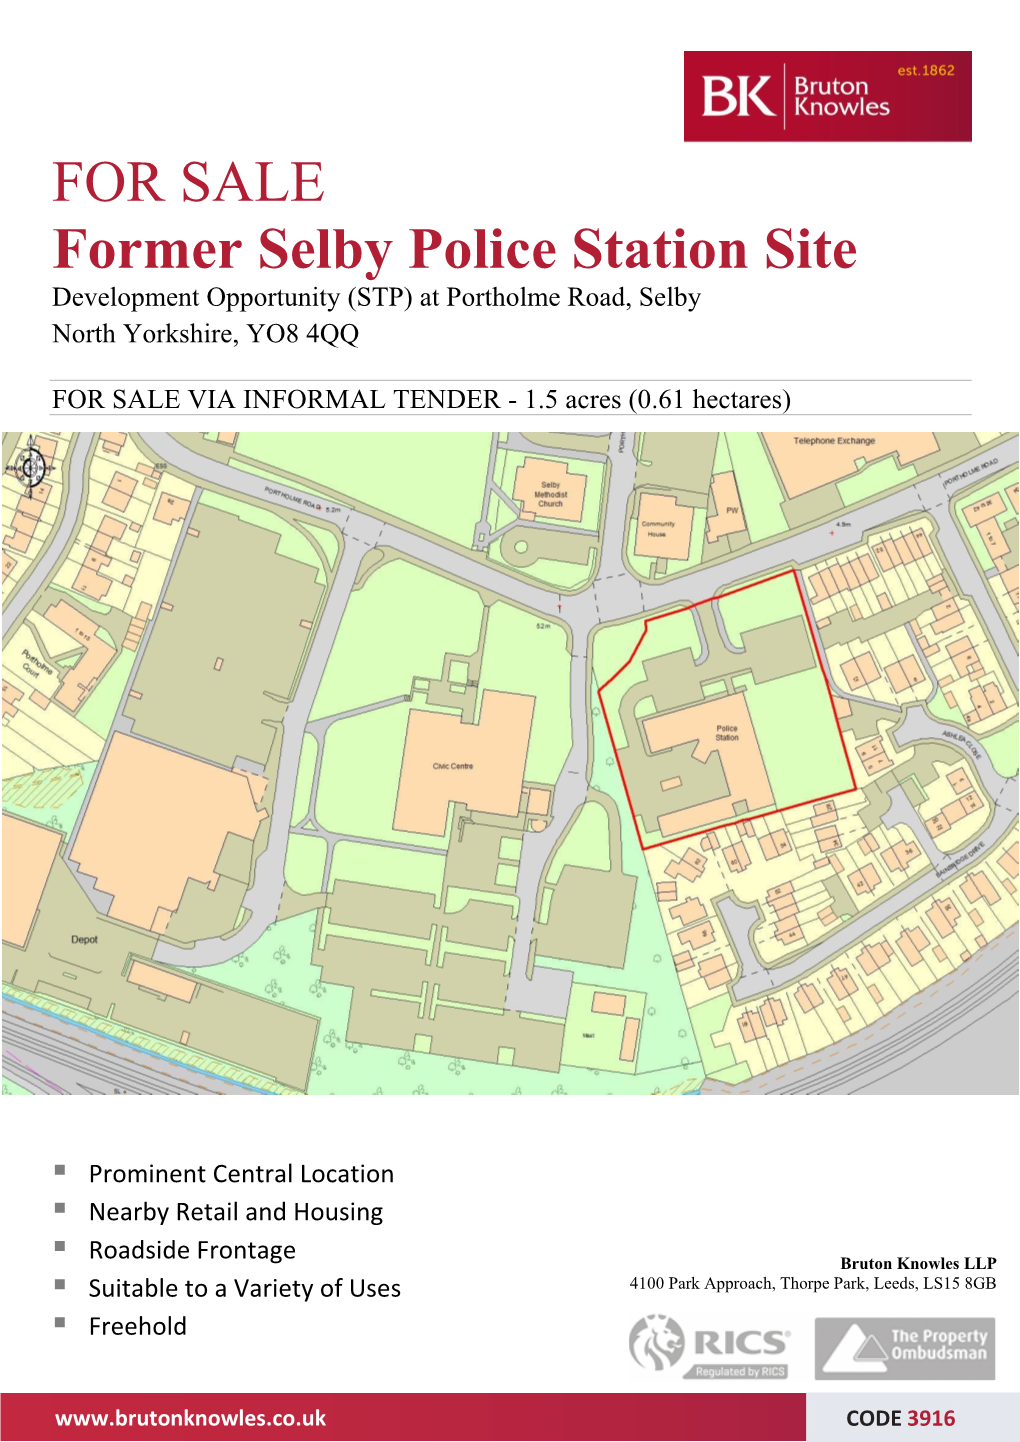 FOR SALE Former Selby Police Station Site Development Opportunity (STP) at Portholme Road, Selby North Yorkshire, YO8 4QQ